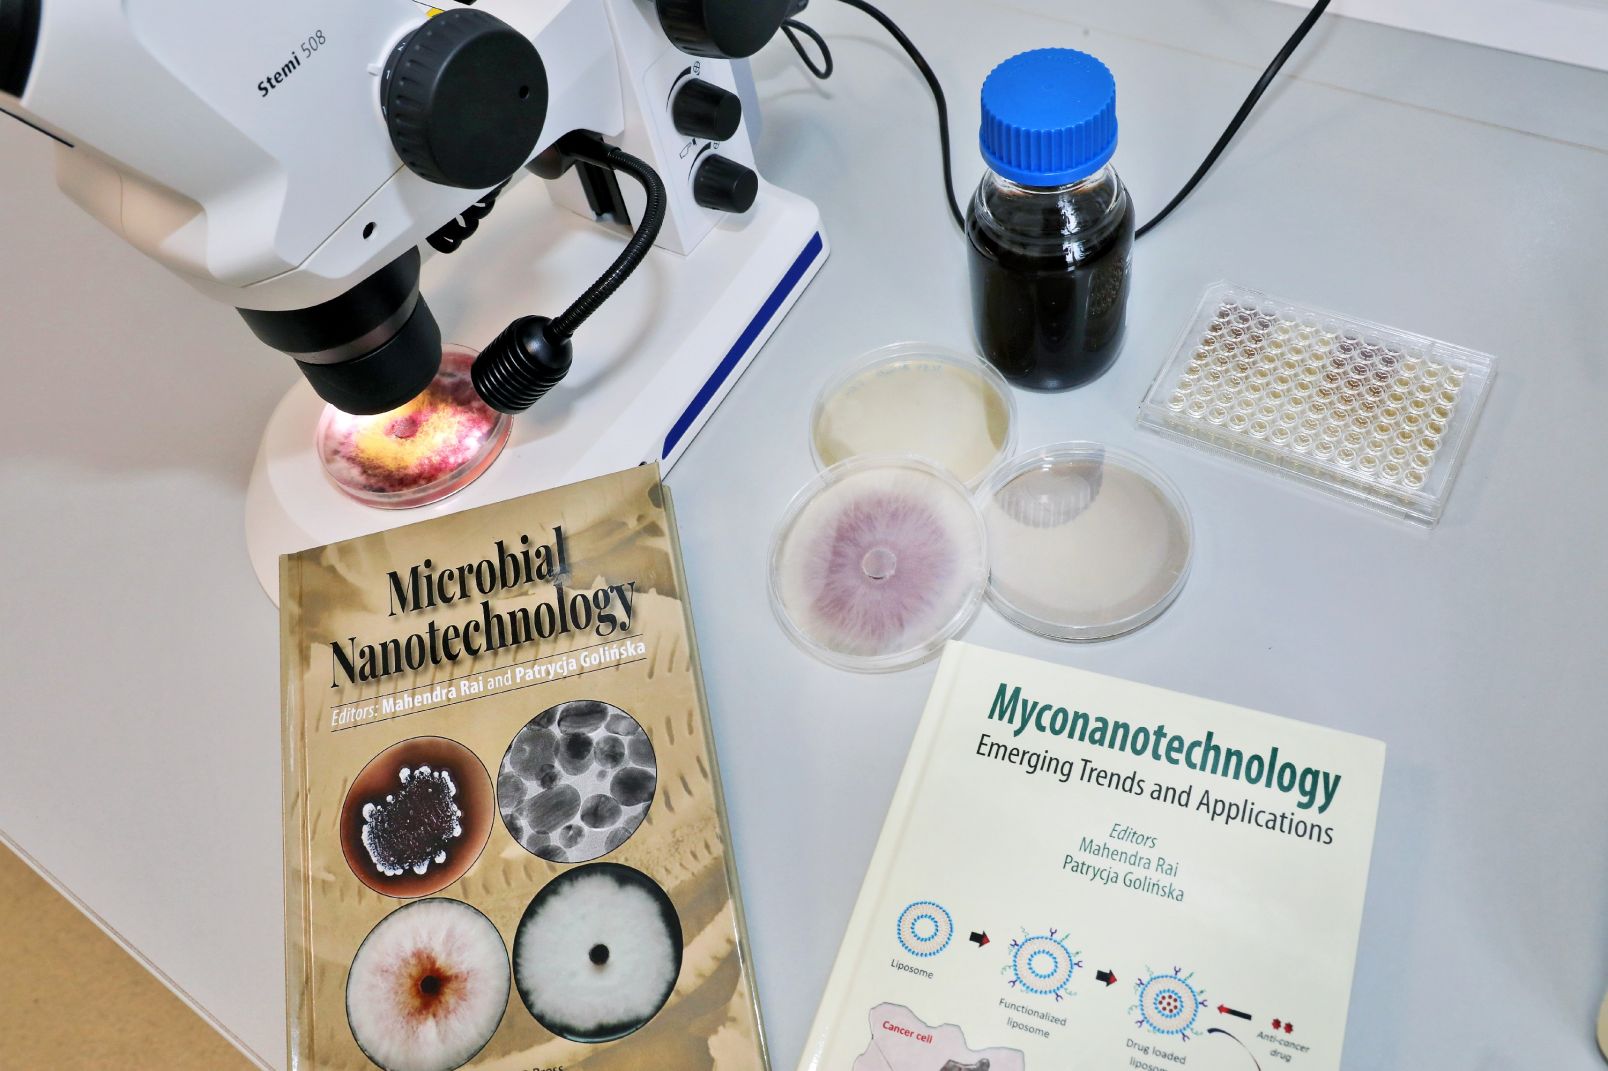  Prof. Ray and Prof. Golińska edited, among others, two books: "Microbial Nanotechnology" and "Myconanotechnology: emerging trends and applications"